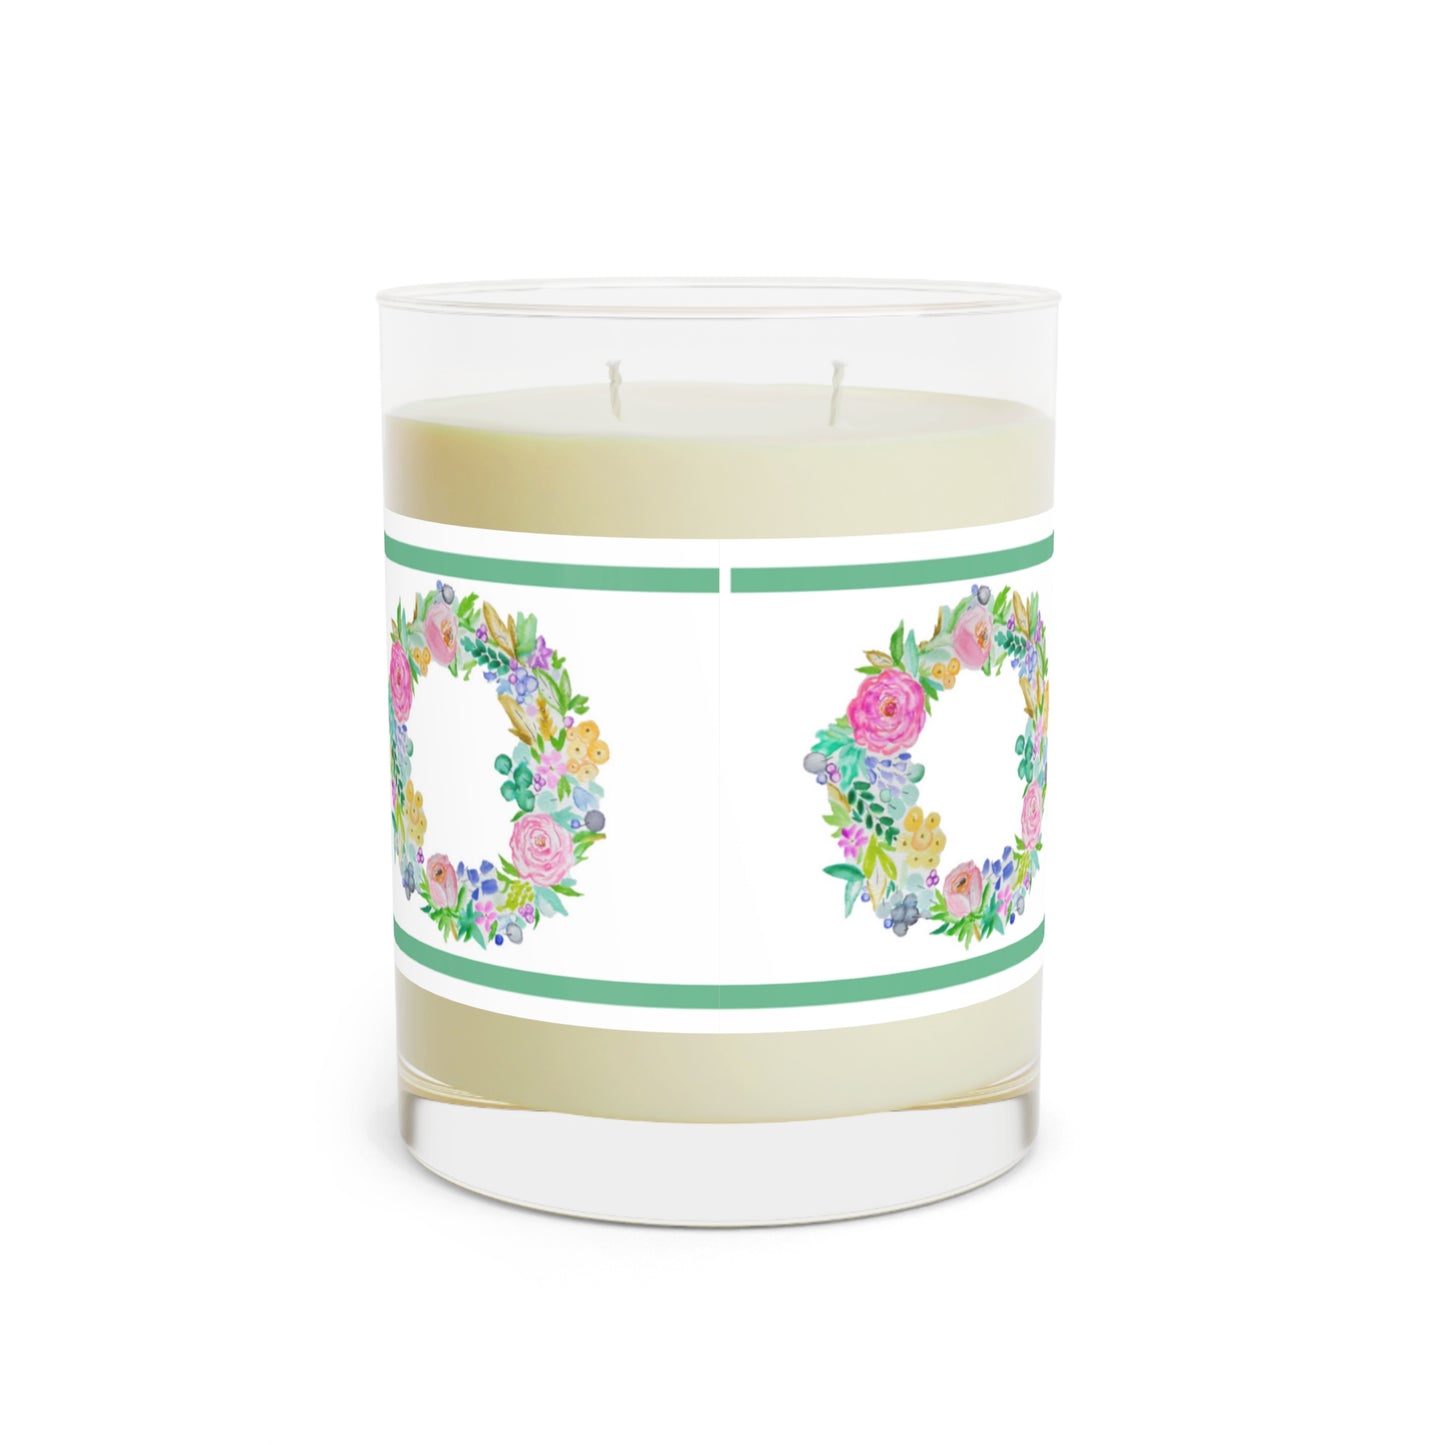 Wing Light Art Designs World's Best Mom Scented Candle - Full Glass, 11oz